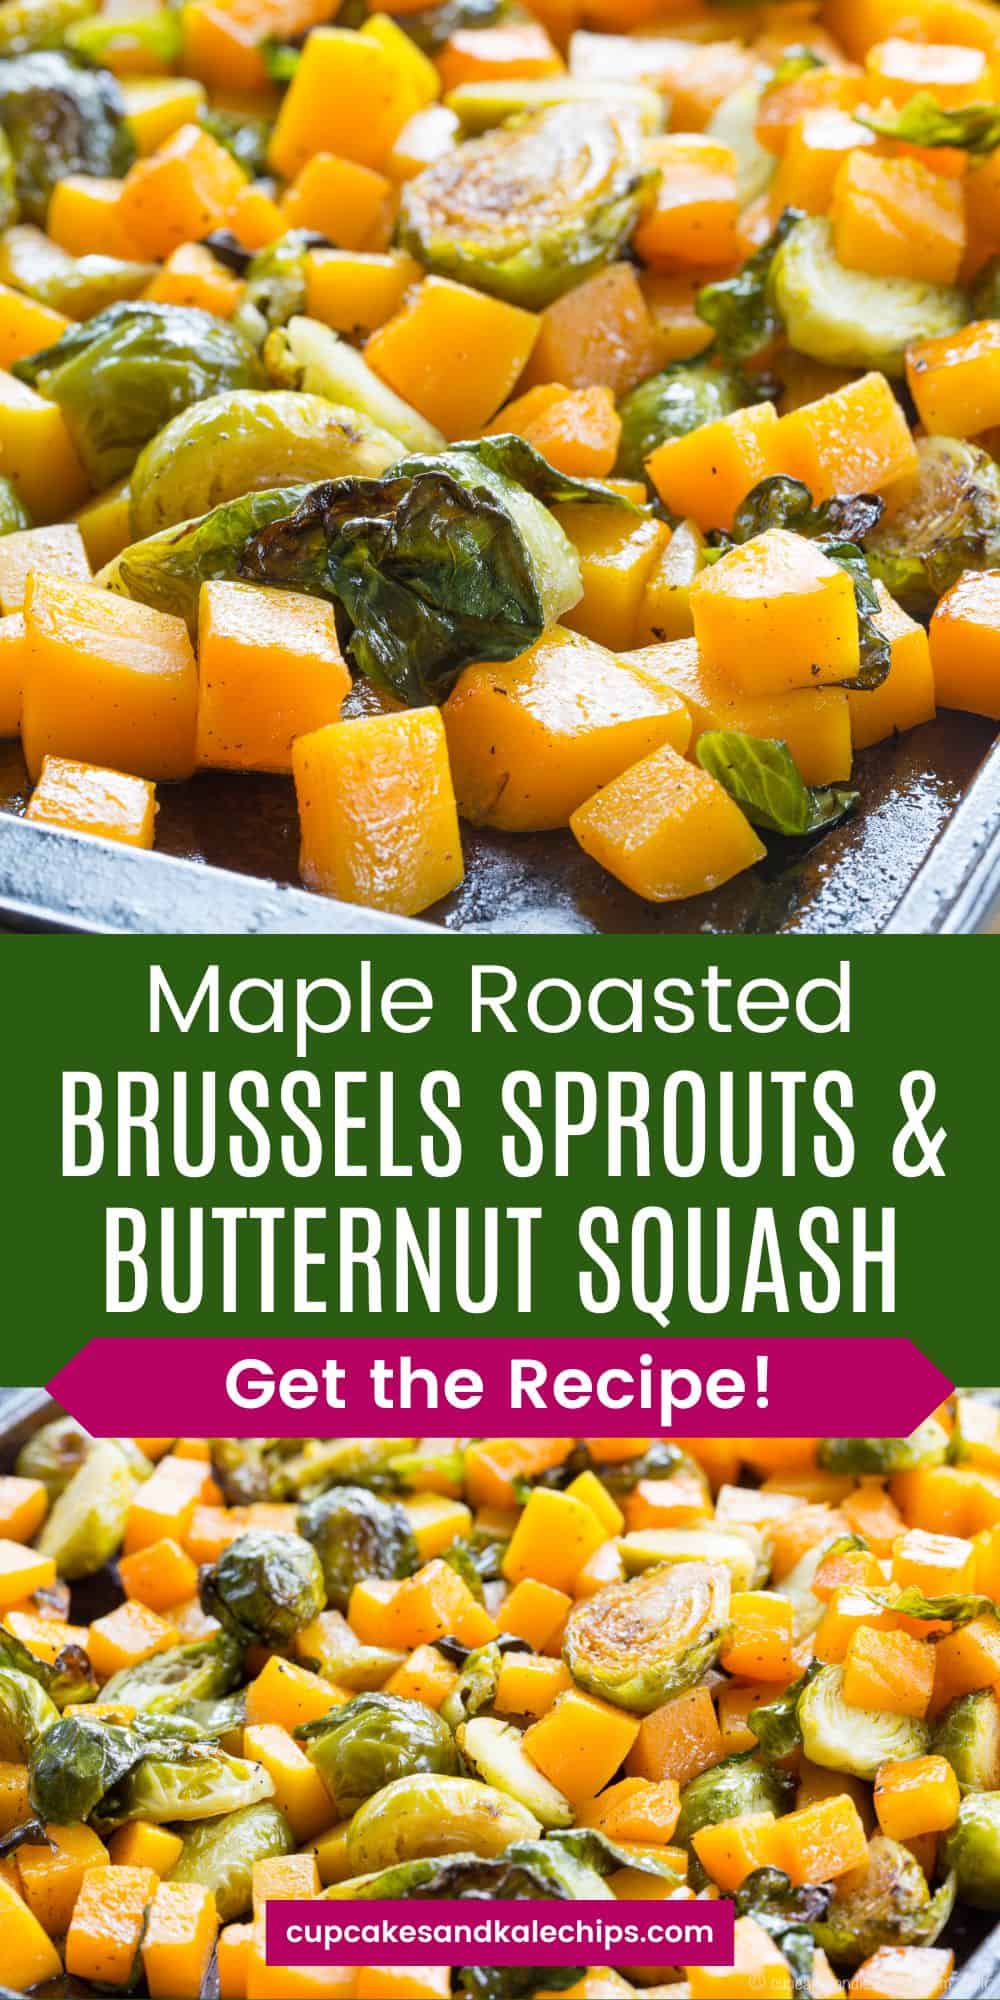 Oven Roasted Brussels Sprouts and Butternut Squash